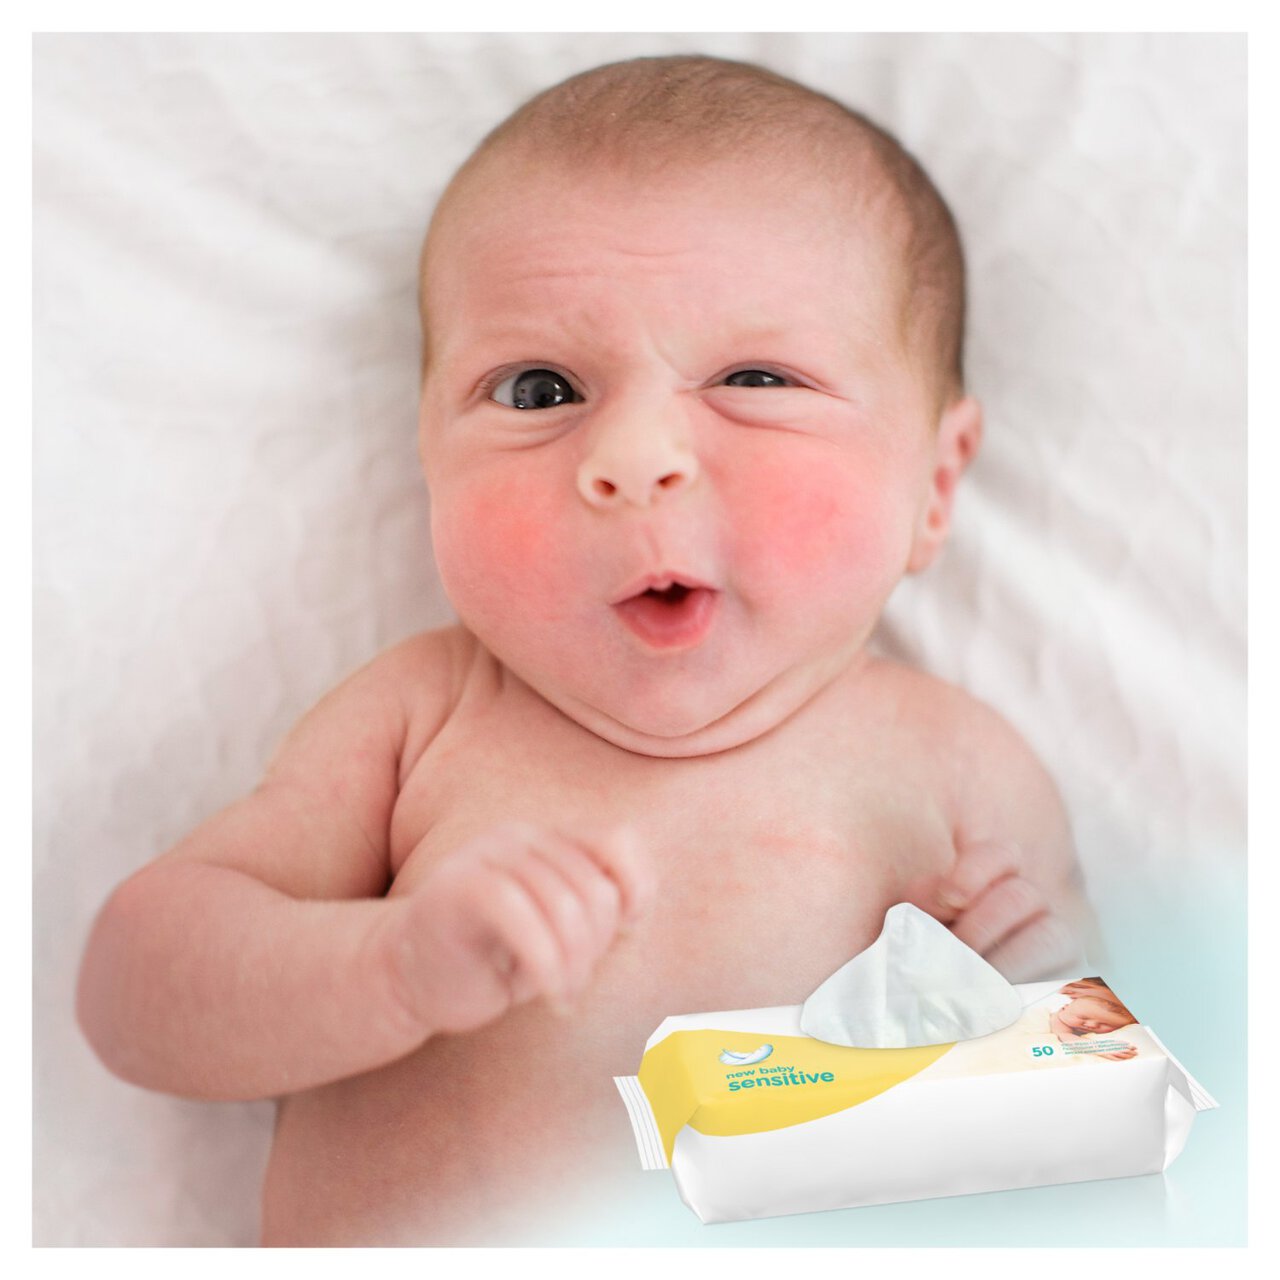 Pampers New Baby Sensitive 50 Baby Wipes 50 per pack